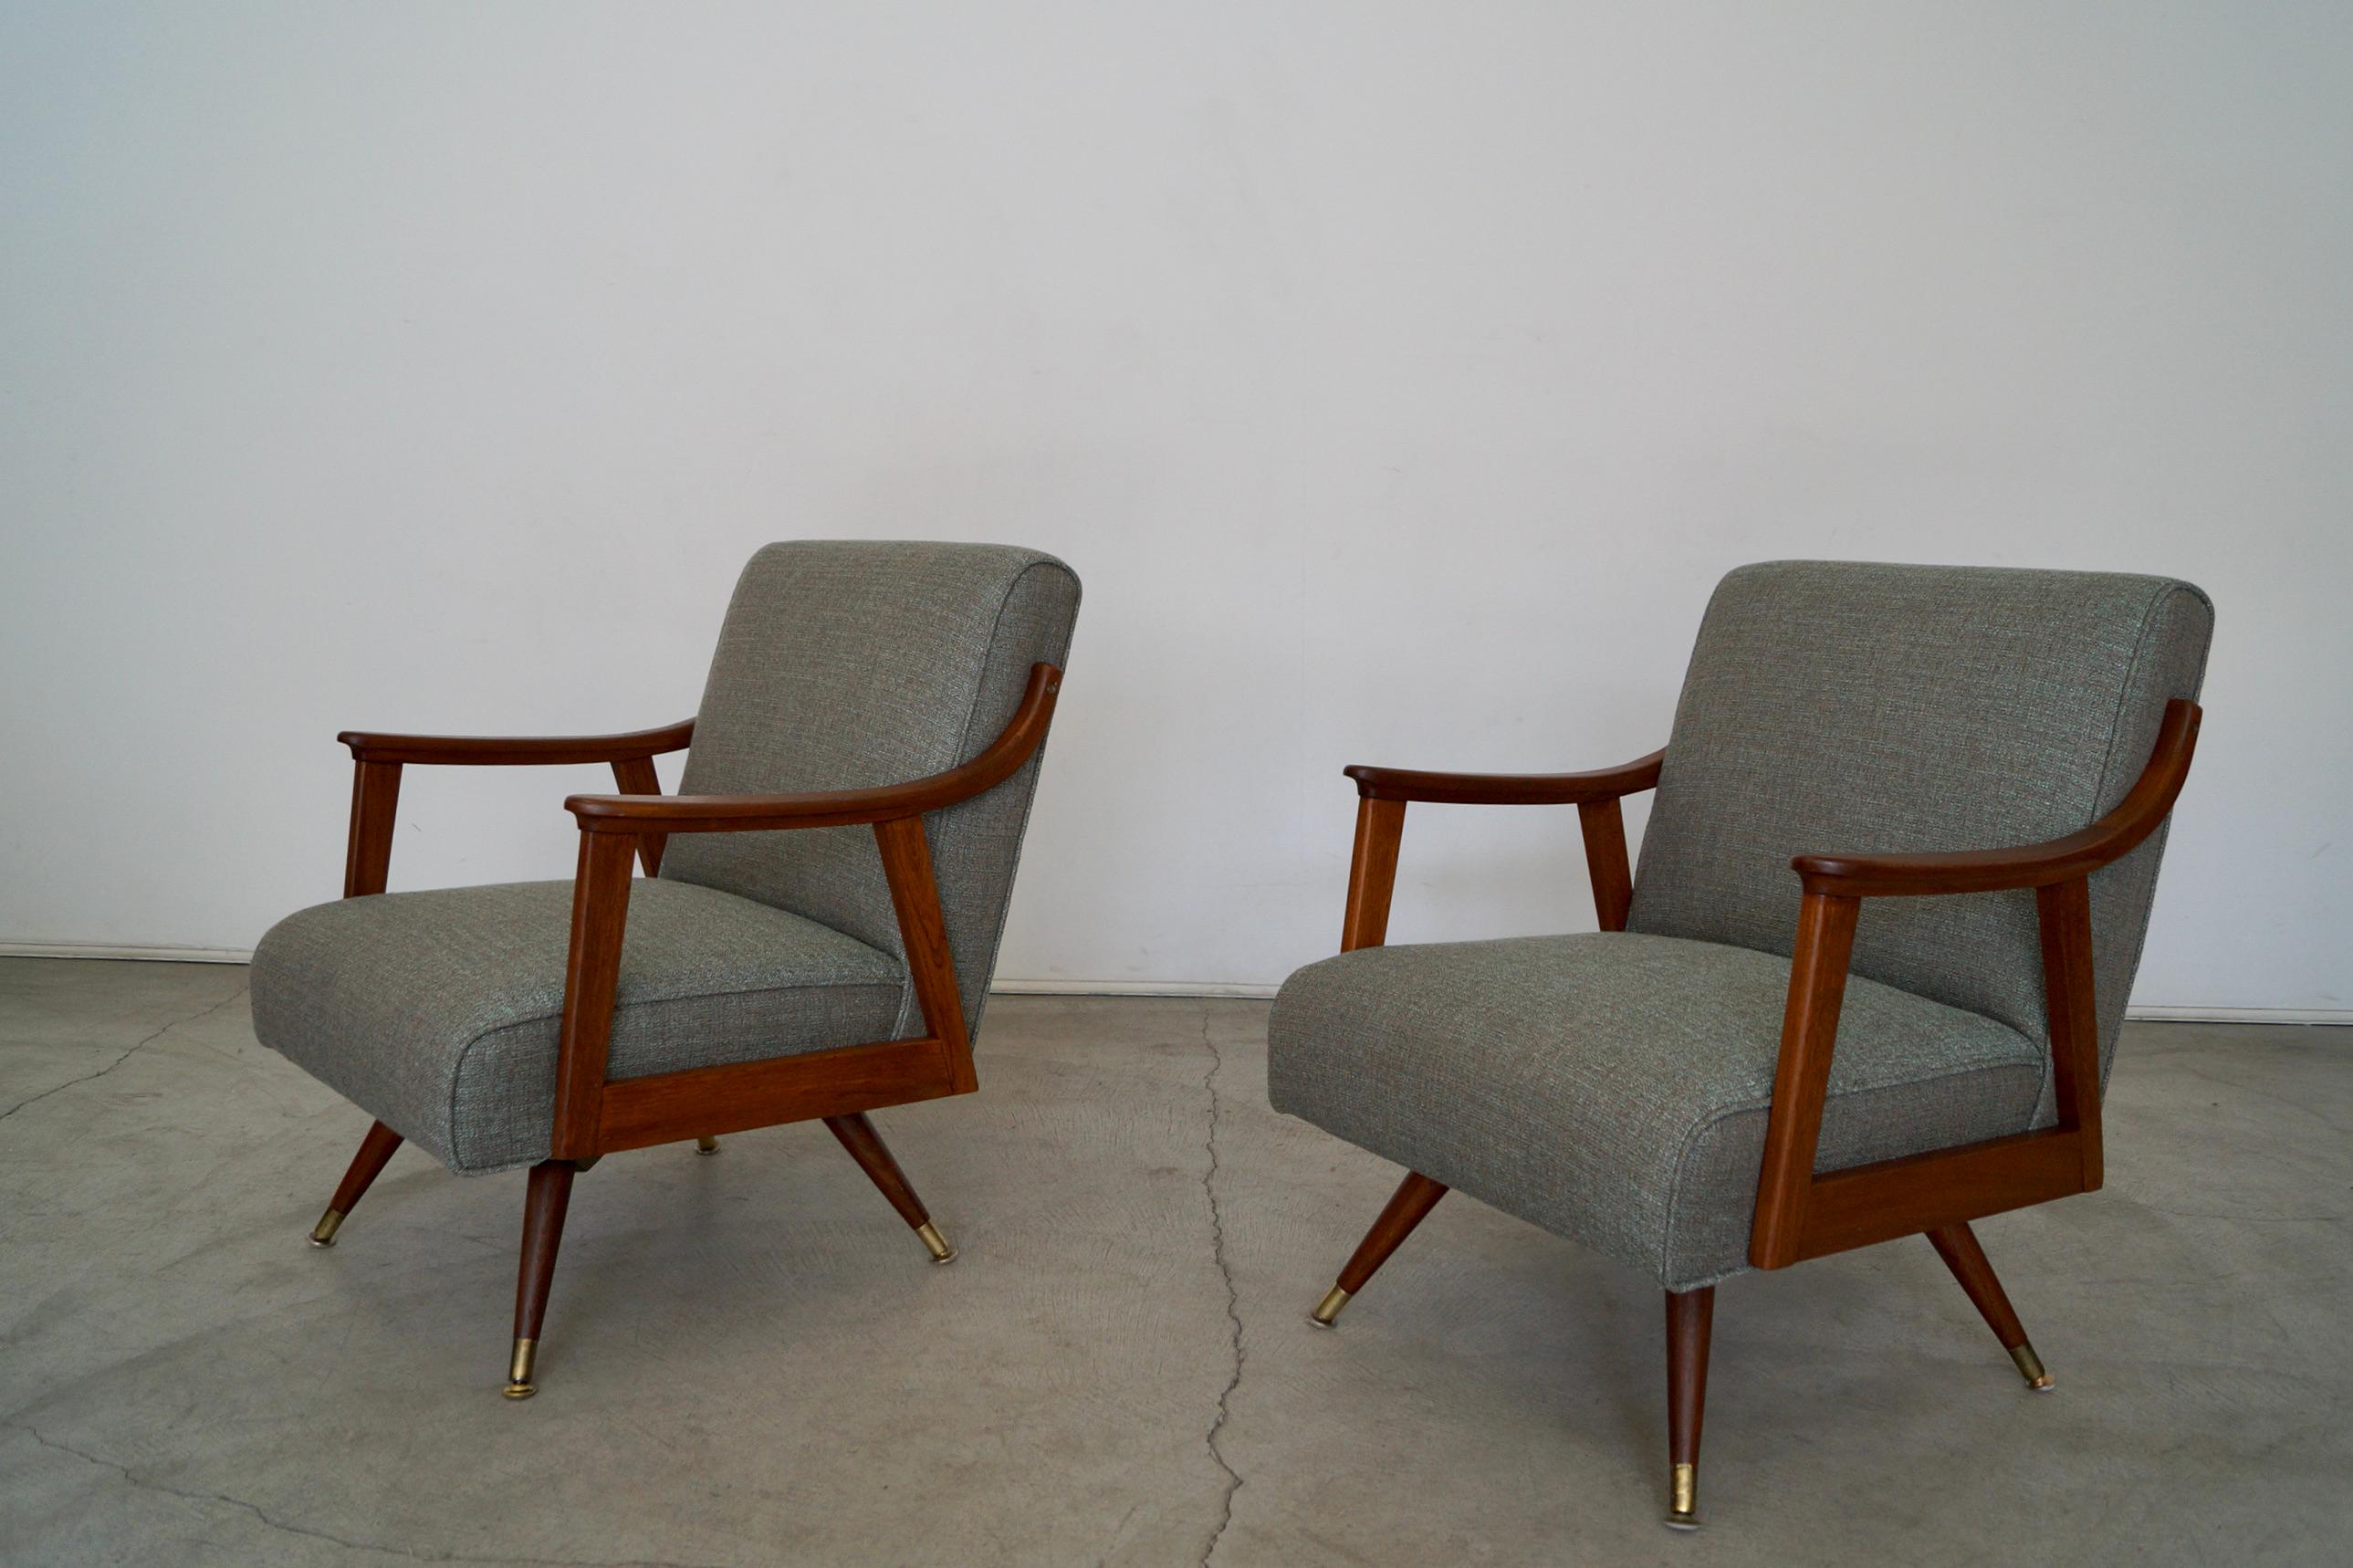 Pair of vintage 1950's Mid-Century Modern lounge chairs for sale. These have been beautifully restored. The frames have been refinished in walnut, and the chairs have been reupholstered in new fabric and foam. We selected a wonderful fabric by